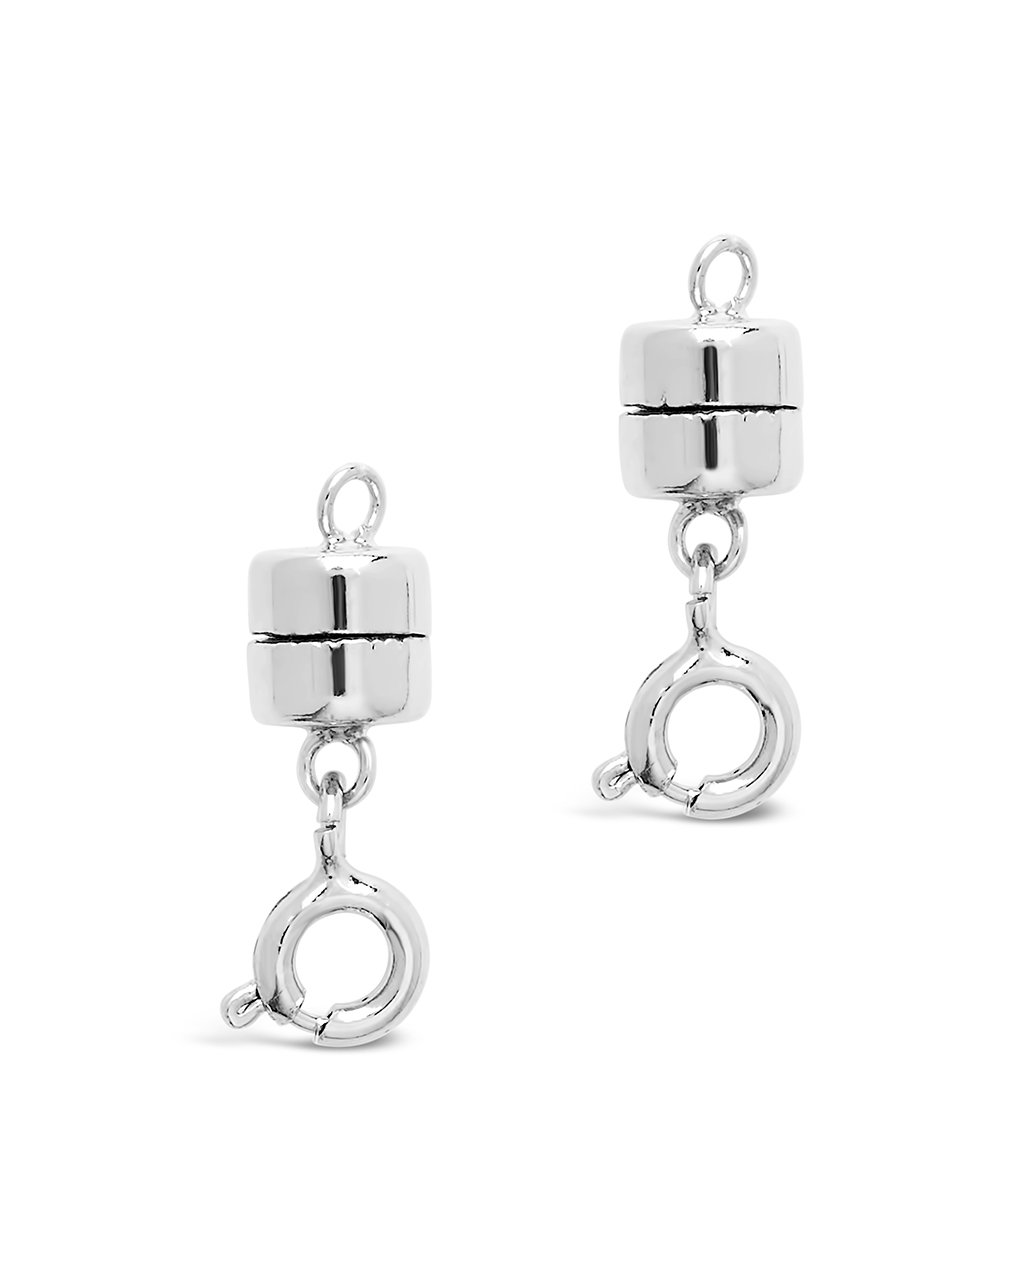 Heart Magnetic Clasp Silver Nickel-Free Plated